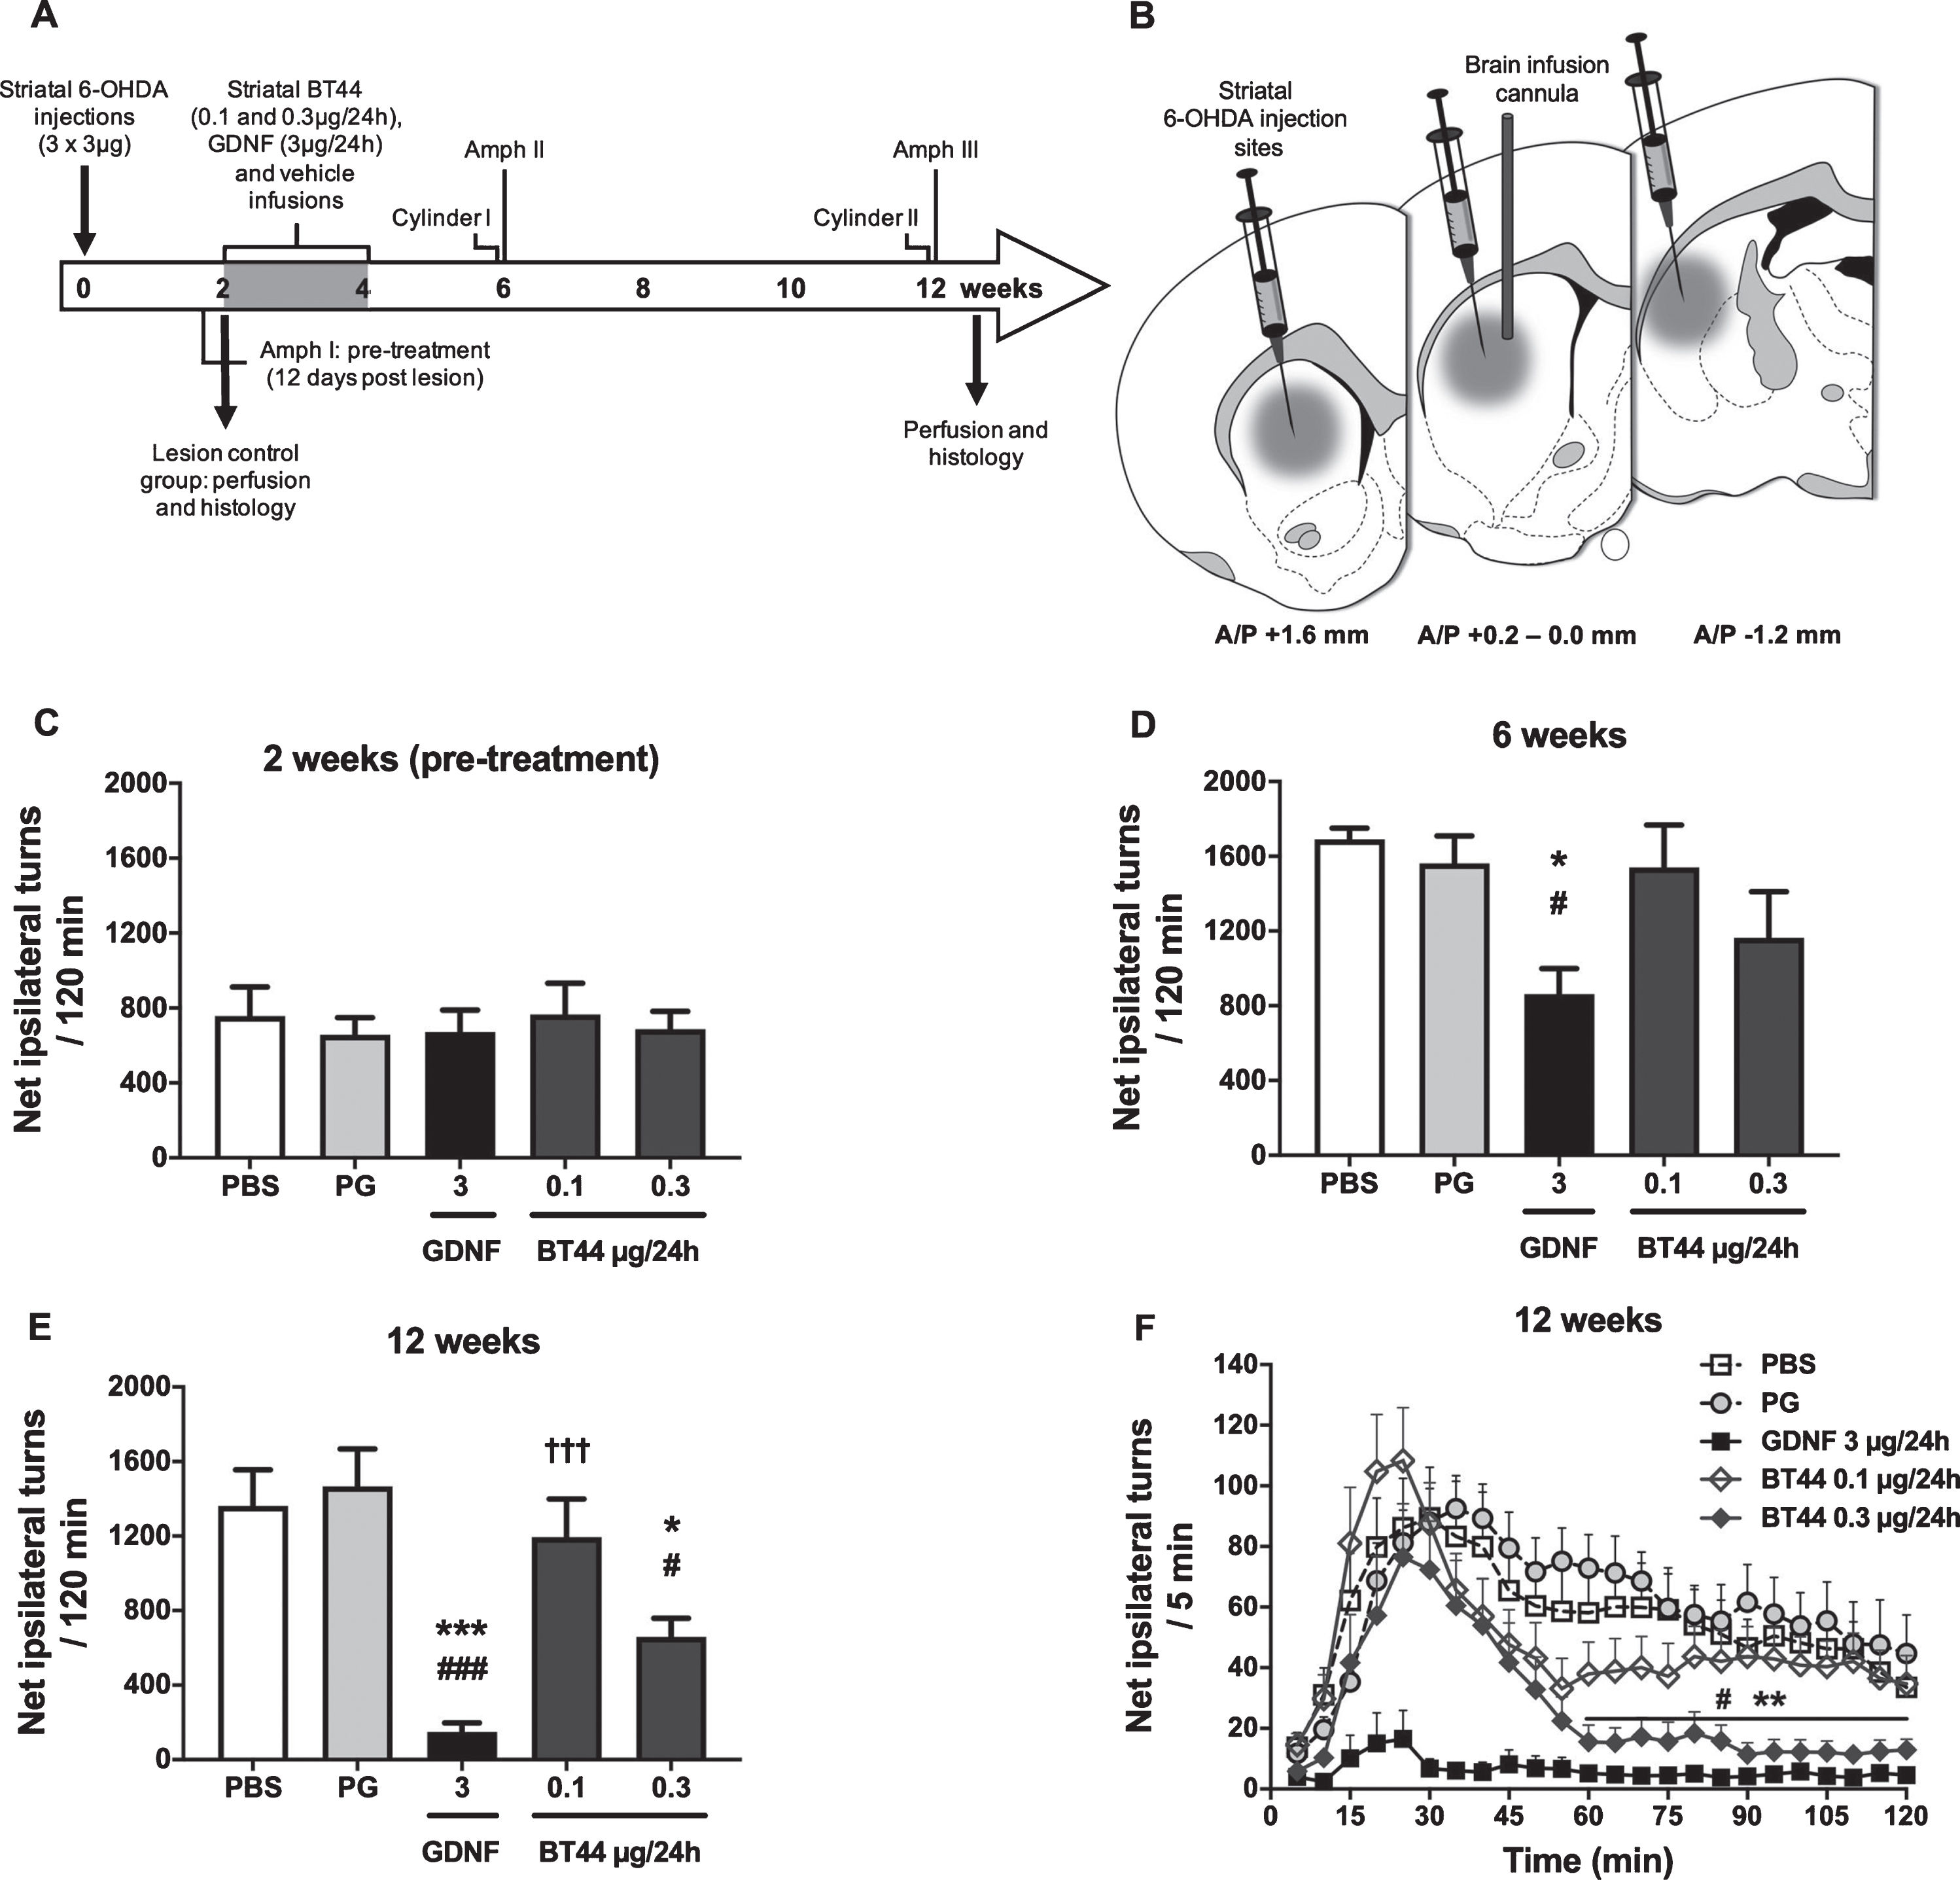 BT44 (0.3μg/24h) and GDNF (3μg/24h) alleviate amphetamine-induced rotational asymmetry in 6-OHDA lesioned rats. Design of the in vivo experiment with 6-OHDA lesioned hemiparkinsonian rats (A). Unilateral striatal 6-OHDA injections, striatal drug delivery with osmotic pumps, time points for amphetamine-induced turning behavior (Amph I-III) and cylinder (Cylinder I and II) tests, and perfusion time points are depicted on the timeline. Schematic illustration of 6-OHDA injection sites and treatment infusion site in the dorsal striatum (B). All rats received 3 deposits of 6-OHDA (3μg/deposit) along the rostrocaudal axis of the right striatum. The syringes indicate the 6-OHDA injection sites and the vertical cannula the treatment infusion site. Amphetamine-induced rotational asymmetry (cumulative data for 120 min) at 2 weeks (C), 6 weeks (D), and 12 weeks (E) after 6-OHDA lesion. Rotation rate per 5 min at 12 weeks post lesion (F). PBS, phosphate buffered saline; PG, propylene glycol. *p < 0.05, ***p < 0.001 vs. PG; #p < 0.05, # # #p < 0.001 vs. PBS; †††p < 0.001 vs. GDNF, Tukey HSD after one-way ANOVA (D, E). **p < 0.01 BT44 0.3μg/24 h vs. PG; #p < 0.05 BT44 0.3μg/24 h vs. PBS, Tukey HSD after RM ANOVA (F). Mean±SEM, n = 8–11 per group.